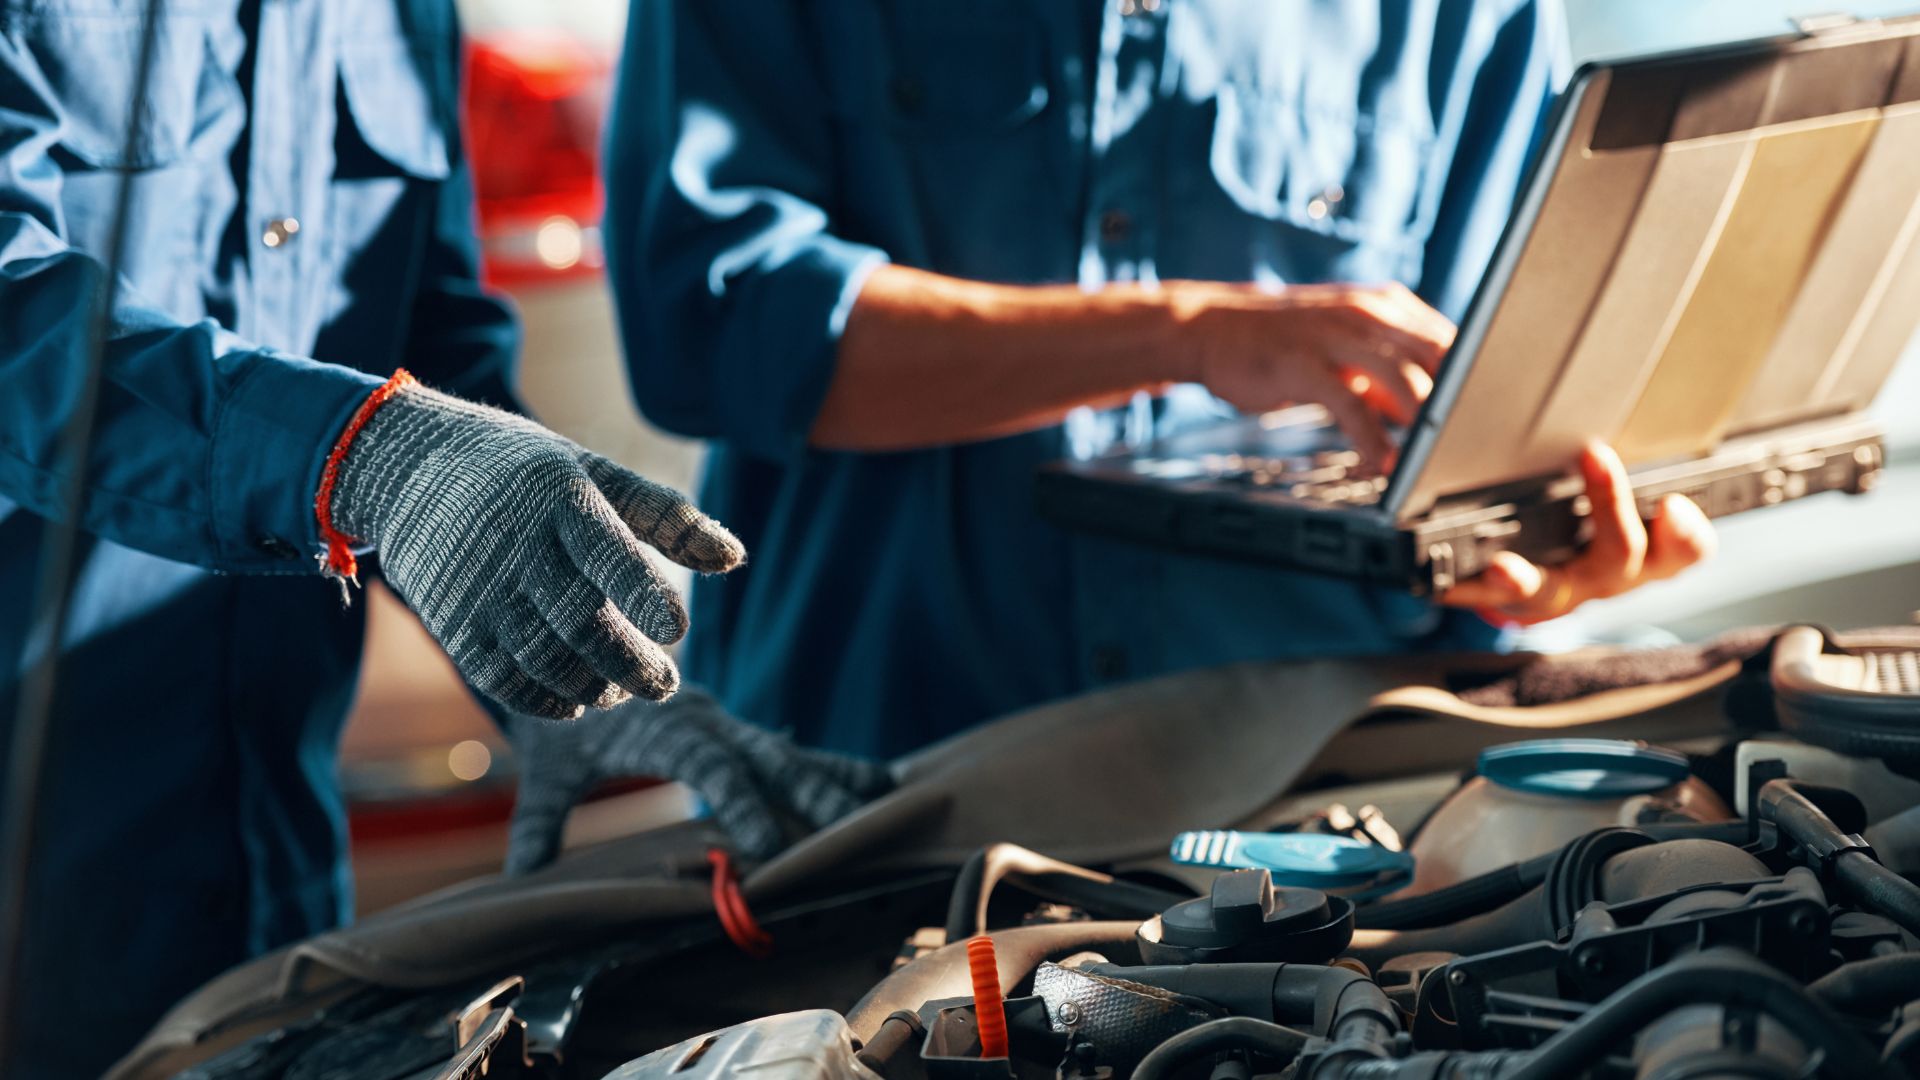 Automotive Future Survey - Image of two vehicle technicians overlooking a car engine, one is holding a laptop